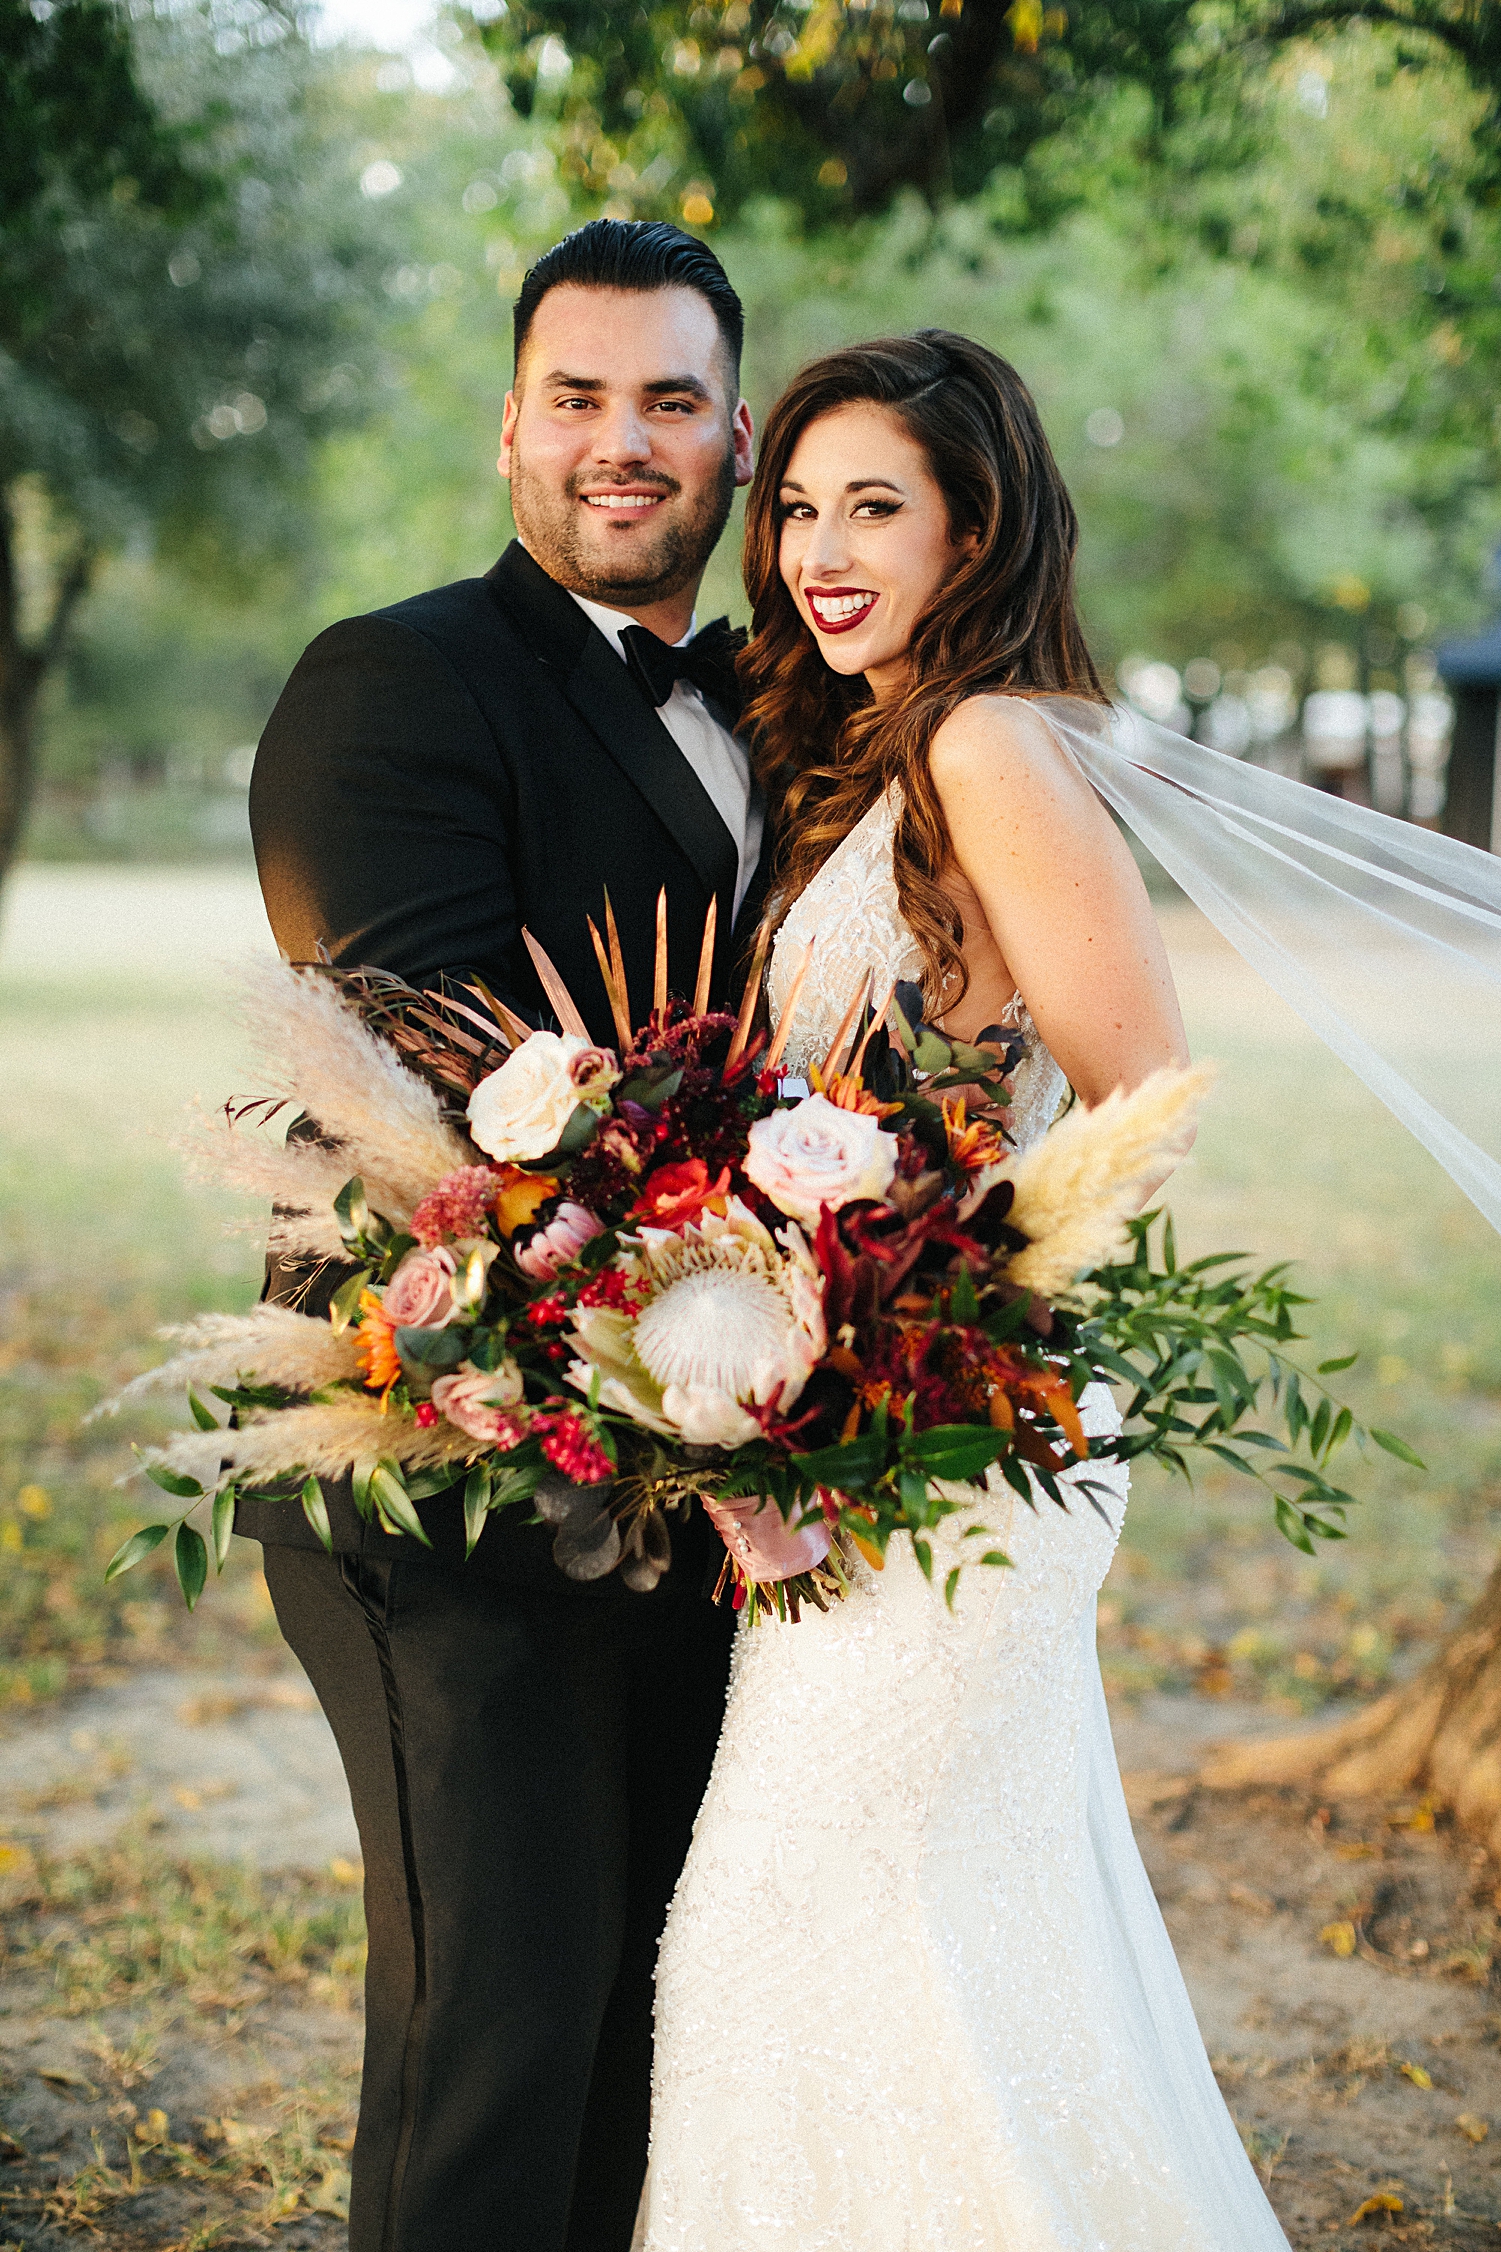 bride in white dress with cape veil embracing groom in black tuxedo holding large bridal bouquet smiling at Emerson Venue Wedding